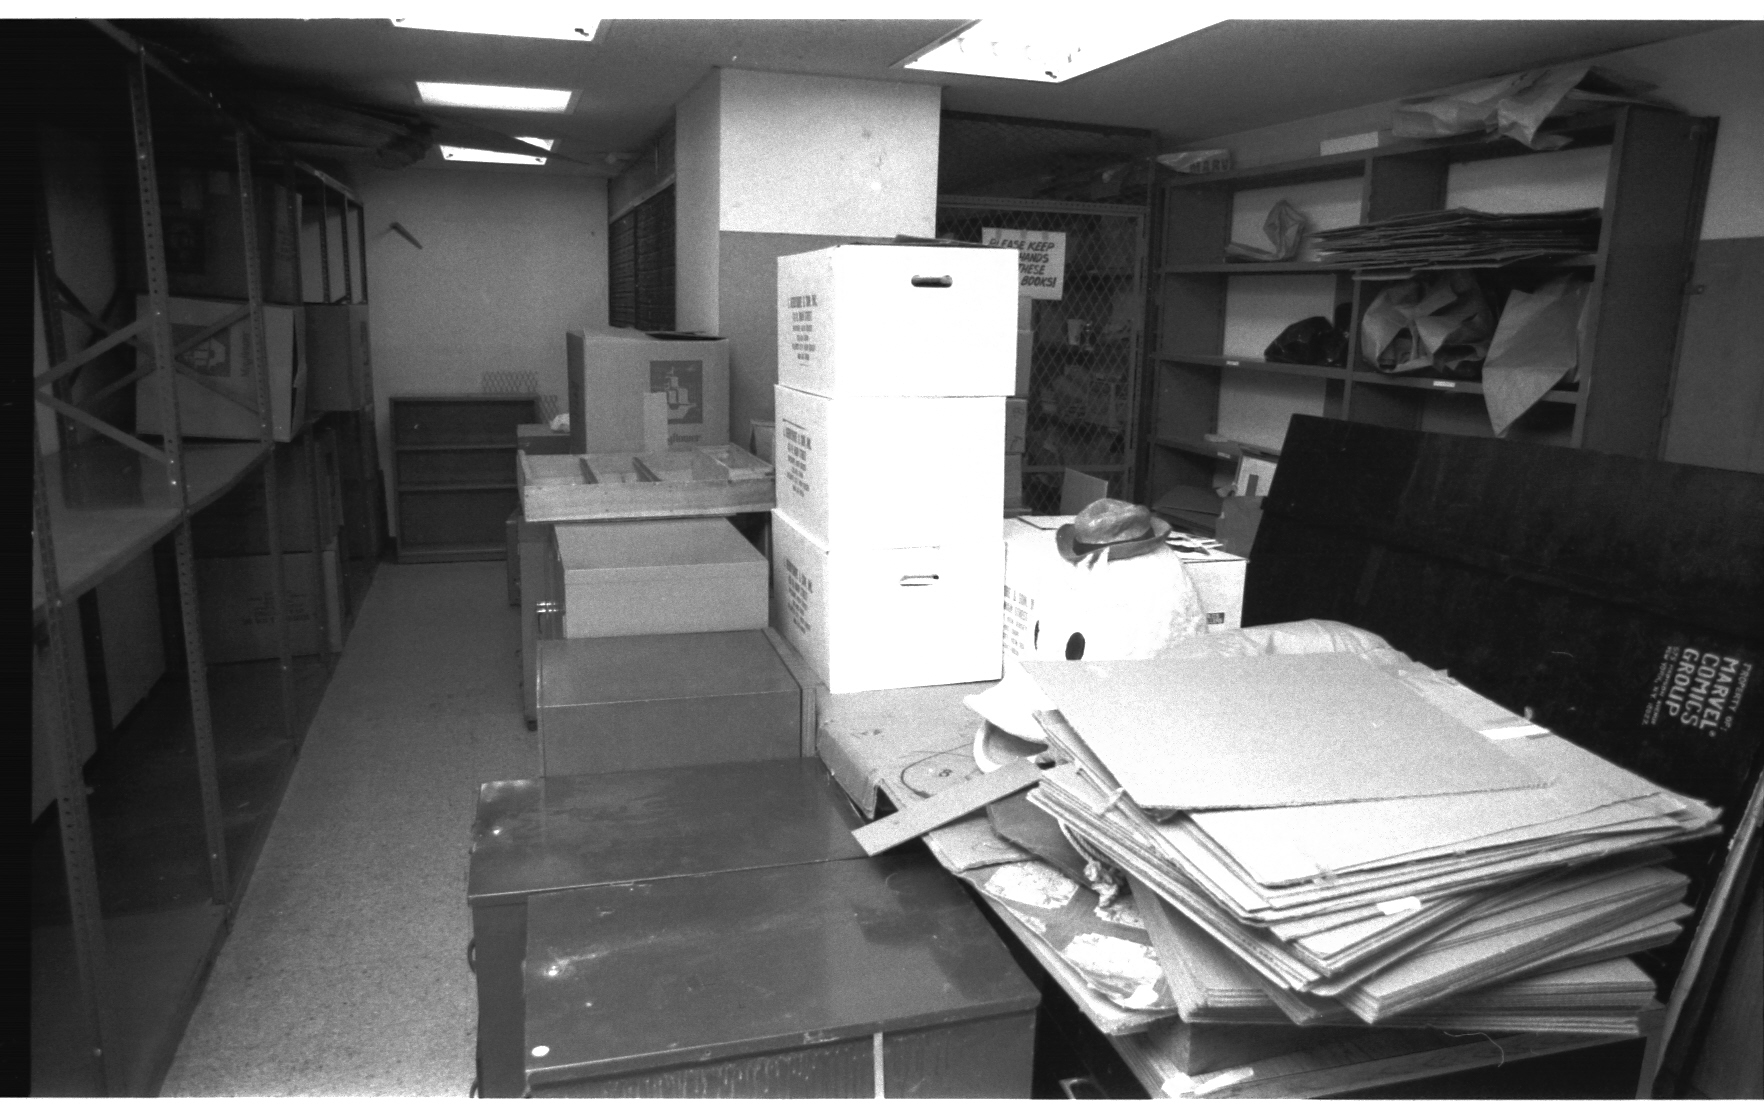 And a better exposed shot of the 9th Floor mailroom. Things were being moved out at this point!